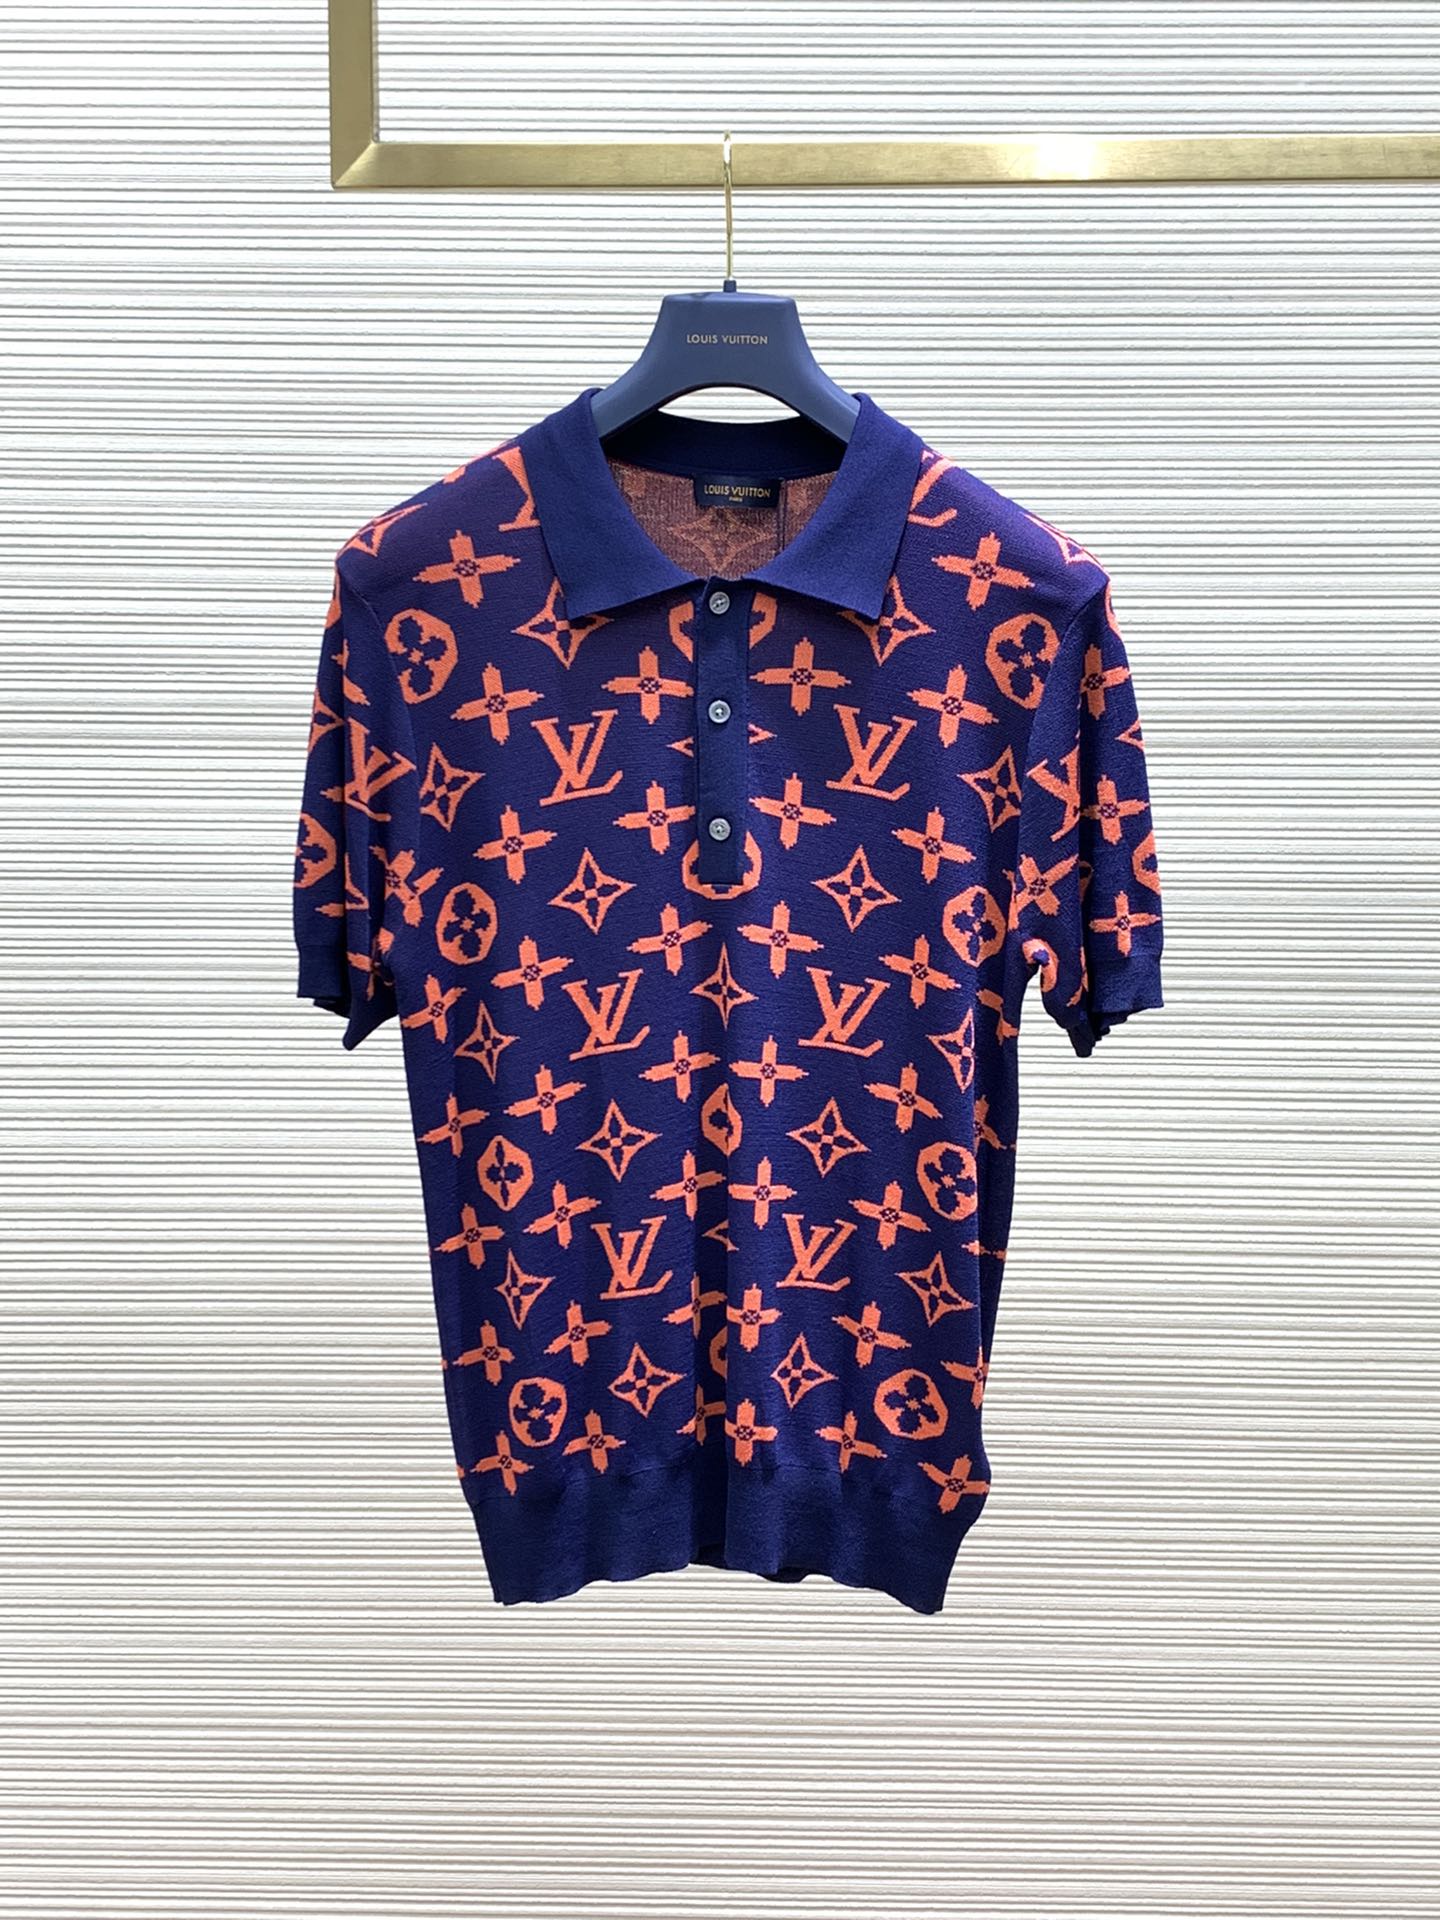 Louis Vuitton Clothing T-Shirt Embroidery Knitting Spring/Summer Collection Fashion Short Sleeve